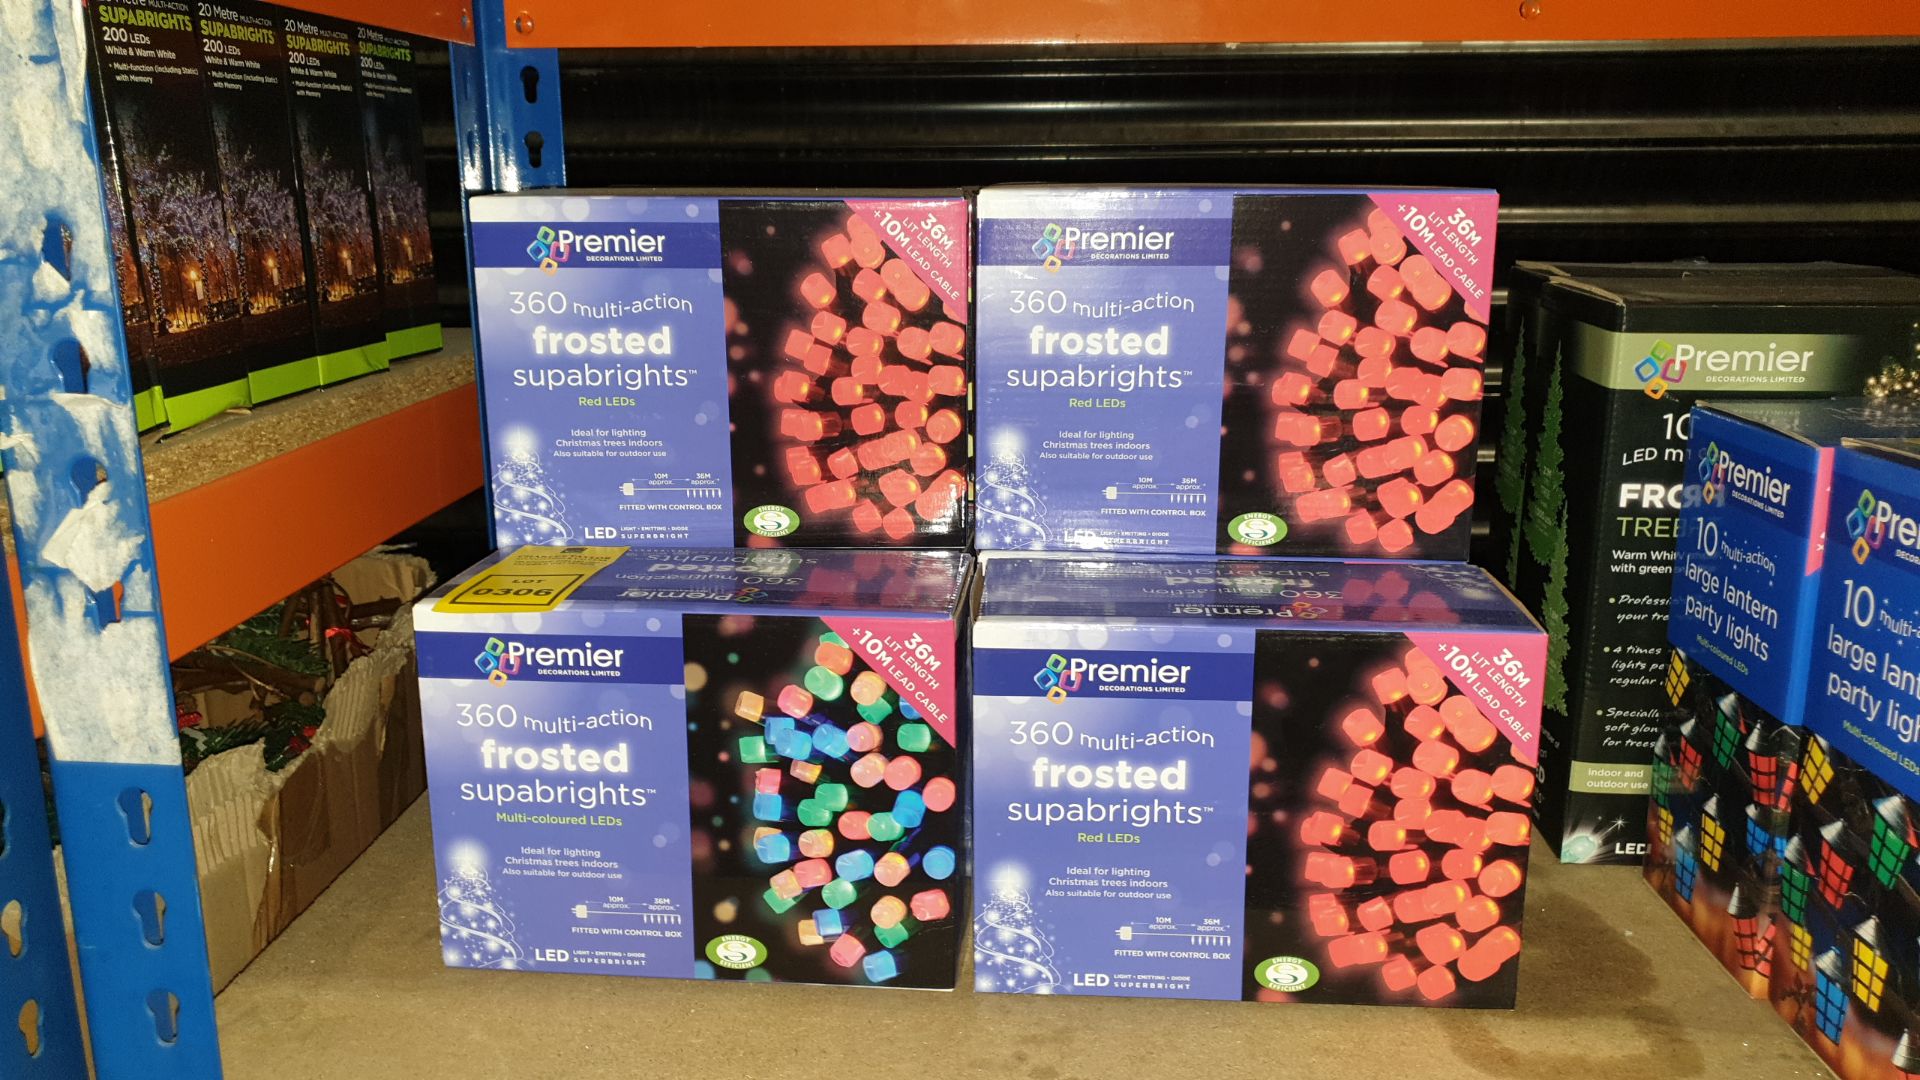 10 X BOXES OF PREMIER 360 MULTI ACTION FROSTED SUPABRIGHTS LIGHTS